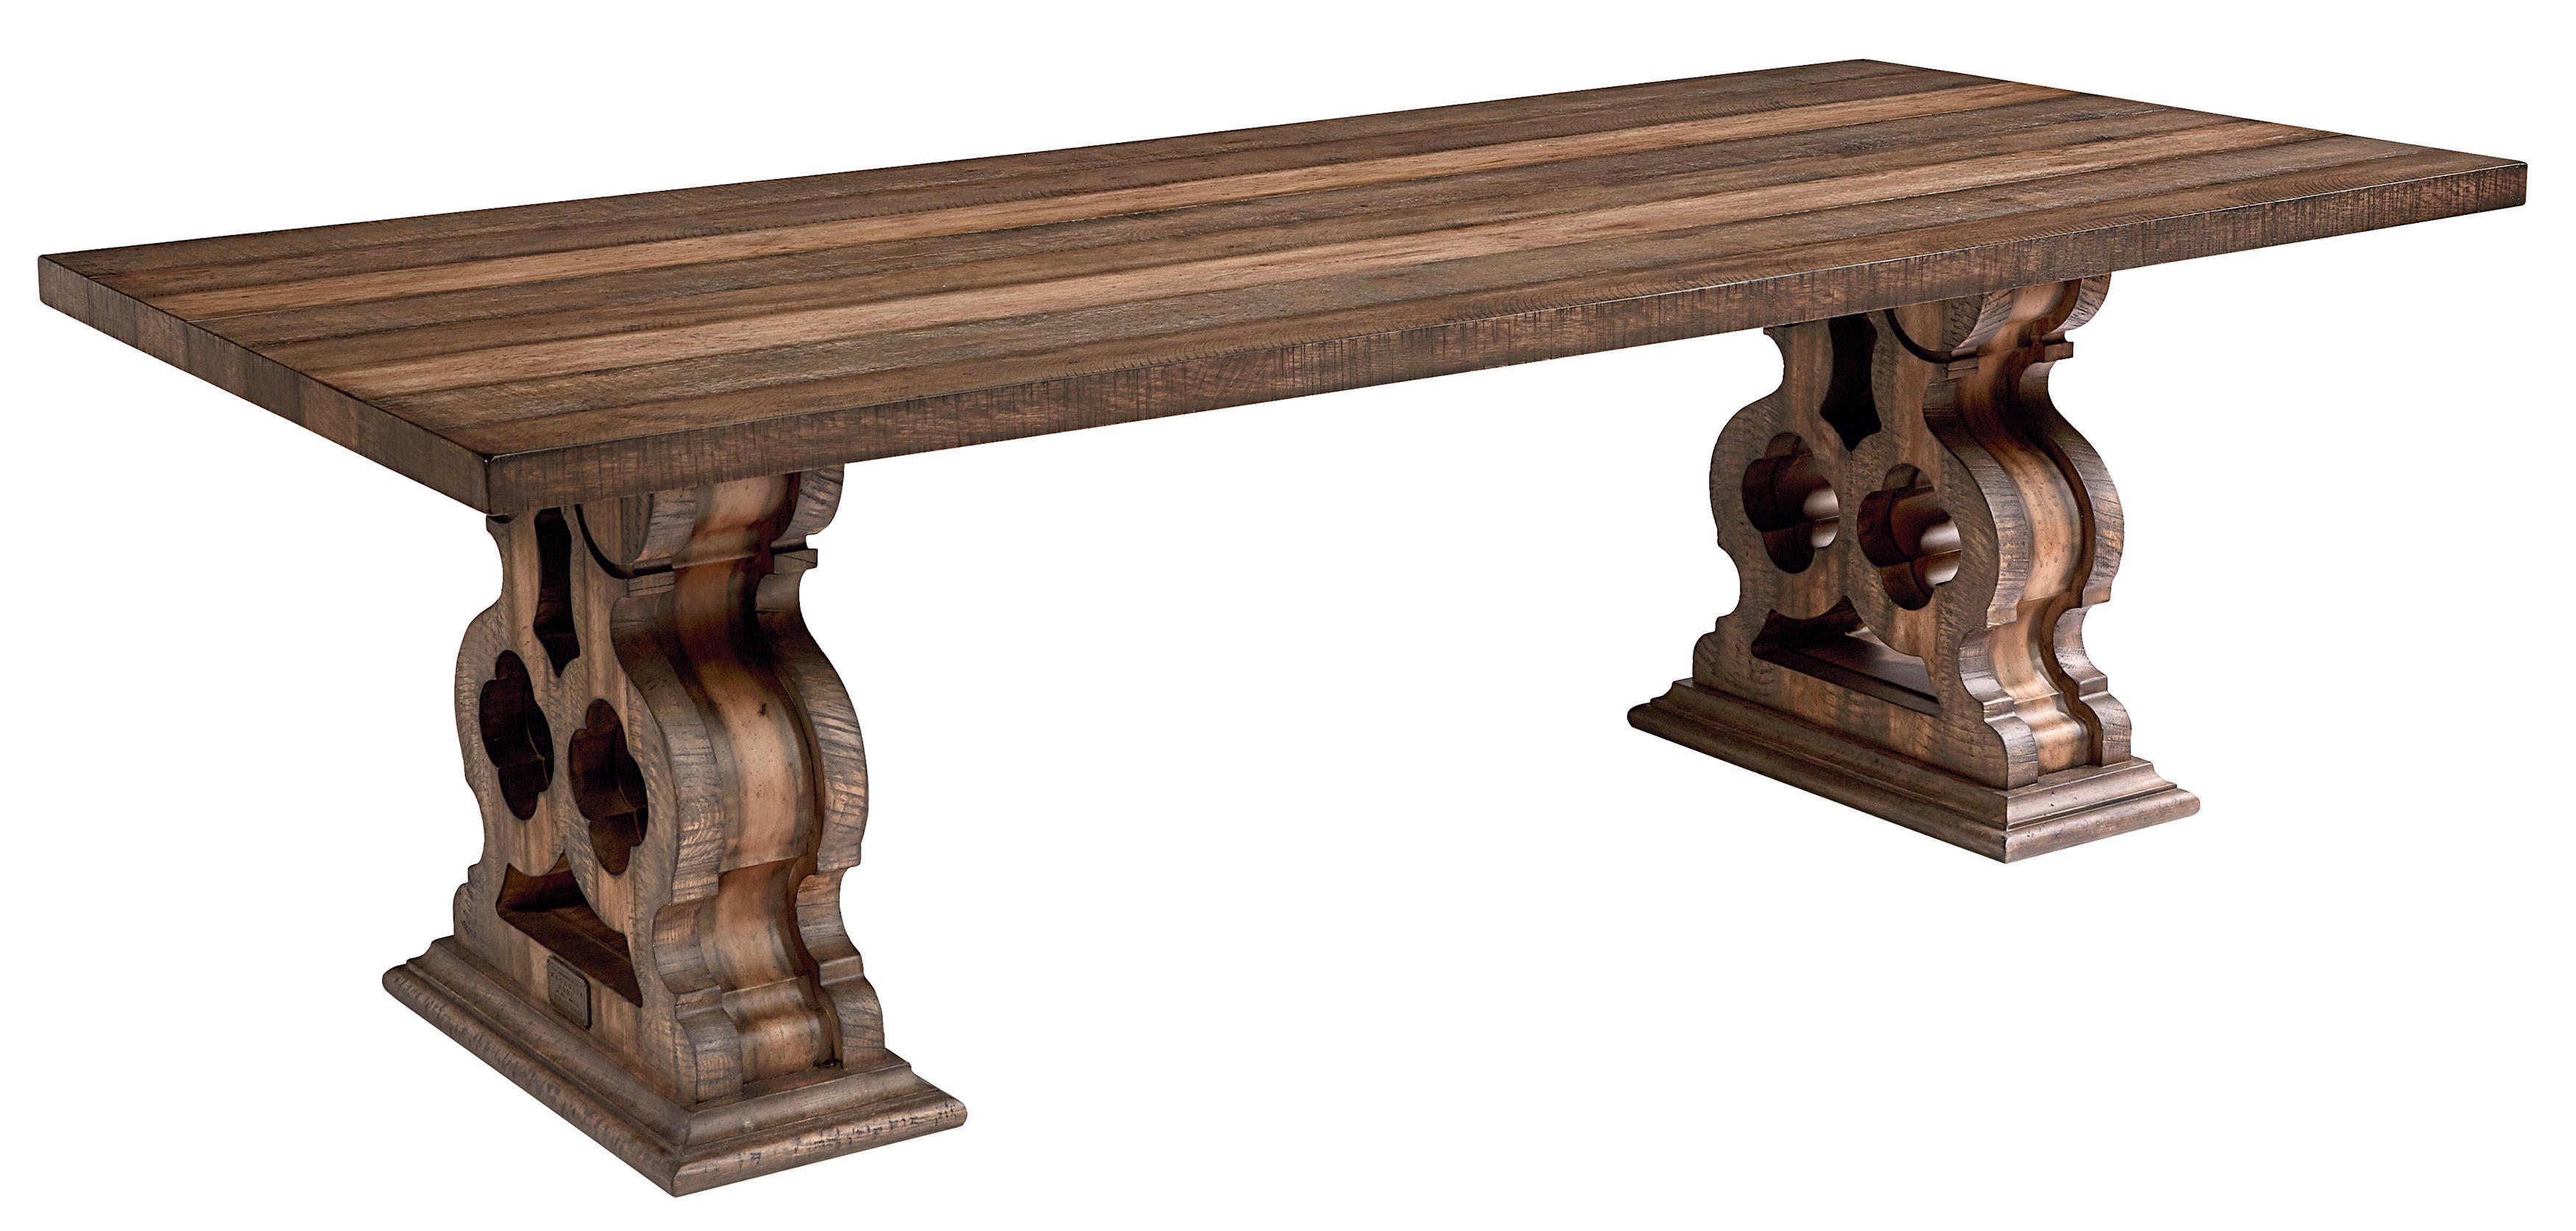 Dining Room Magnolia Home - Double Pedestal Dining Table